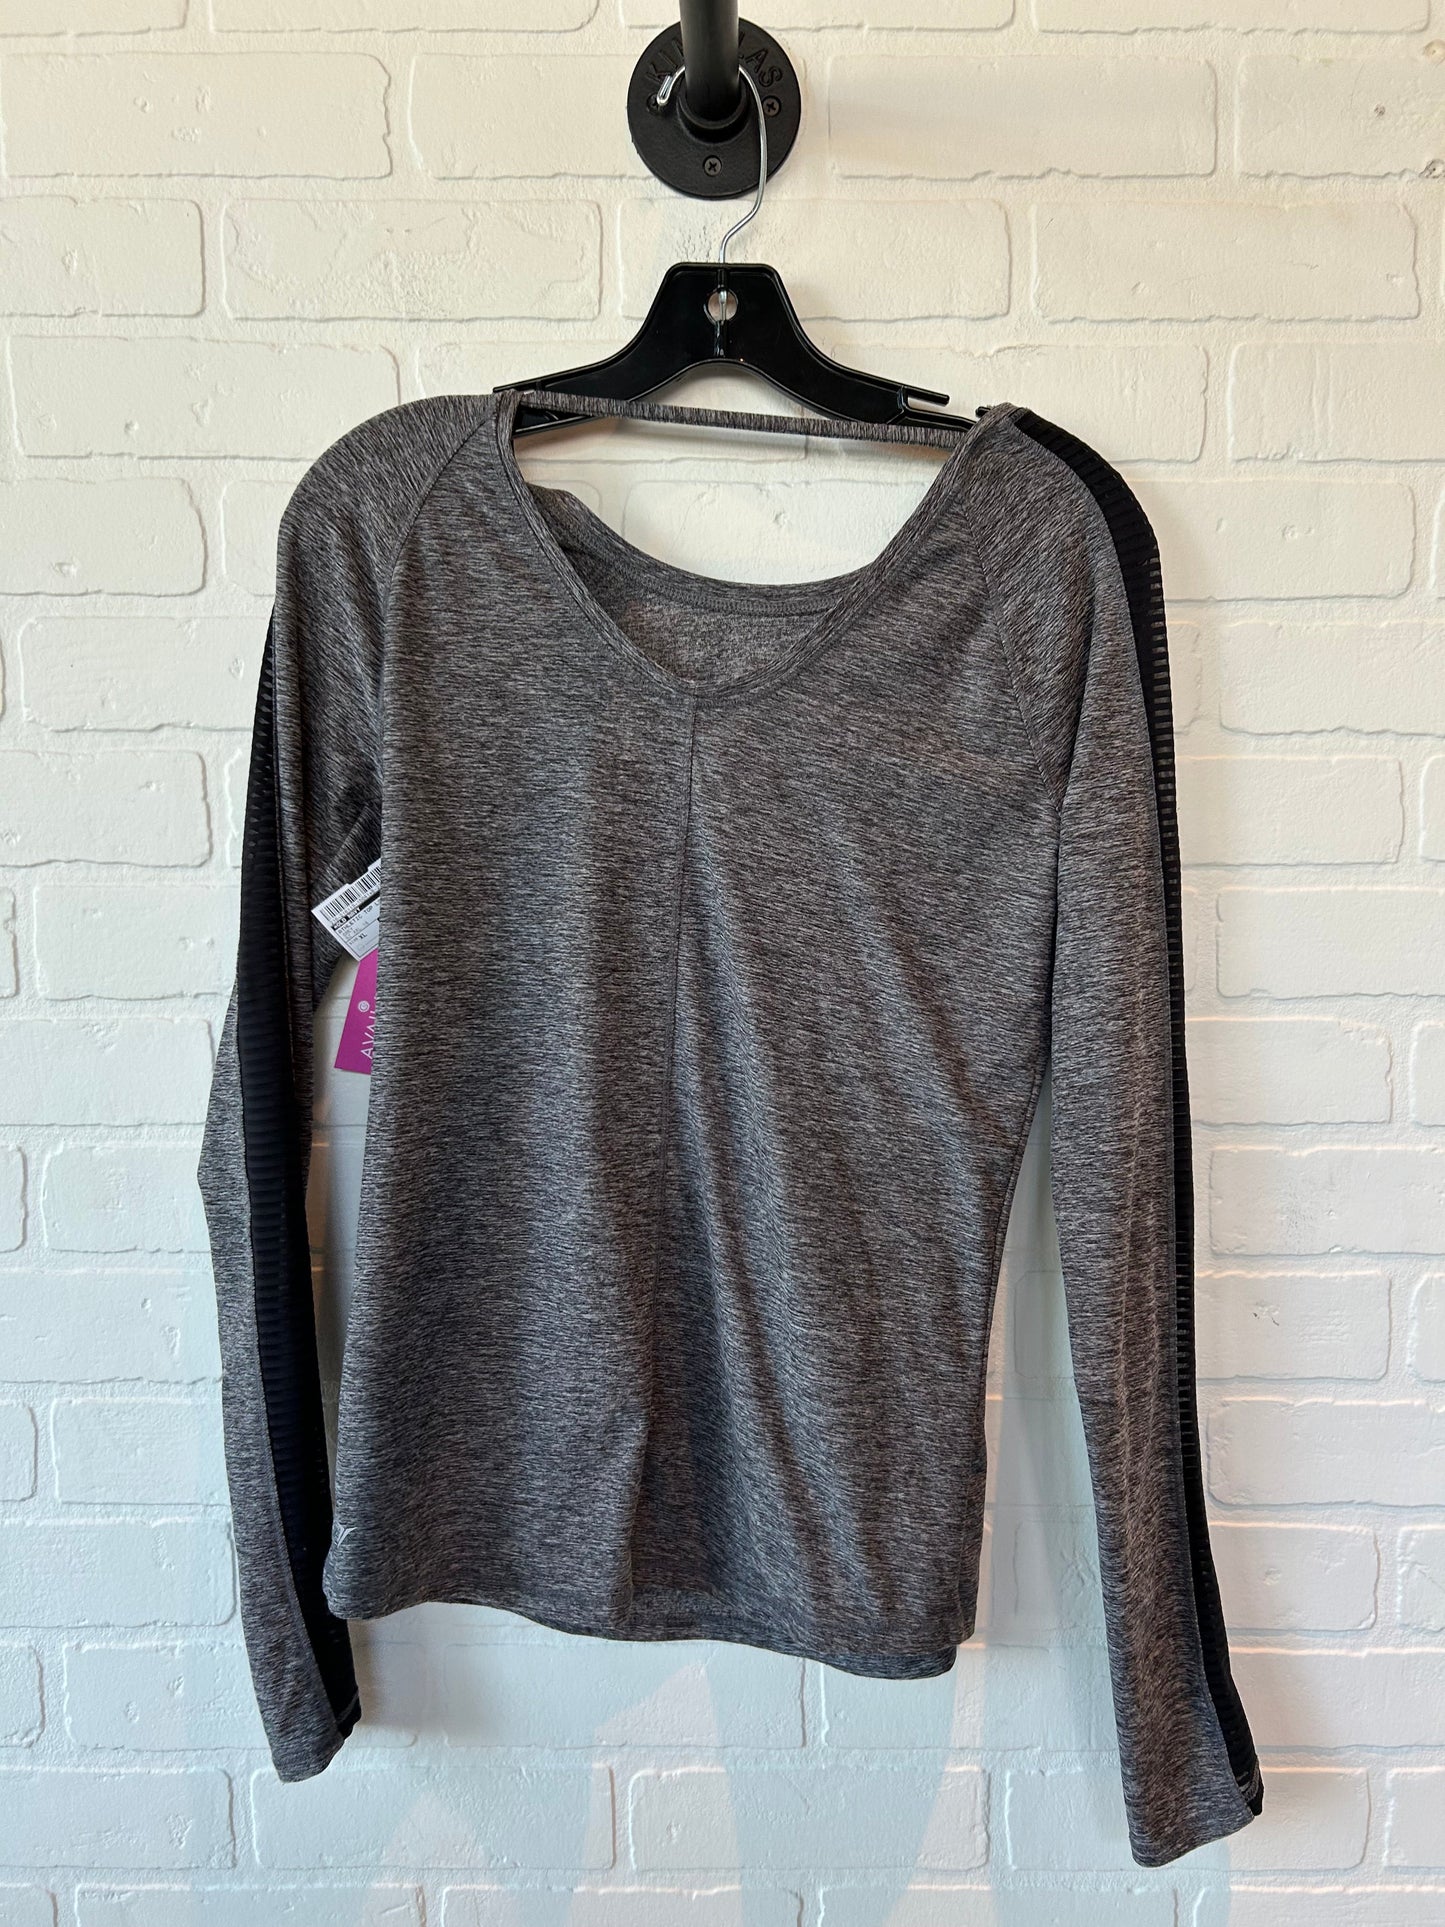 Grey Athletic Top Long Sleeve Collar Old Navy, Size Xl